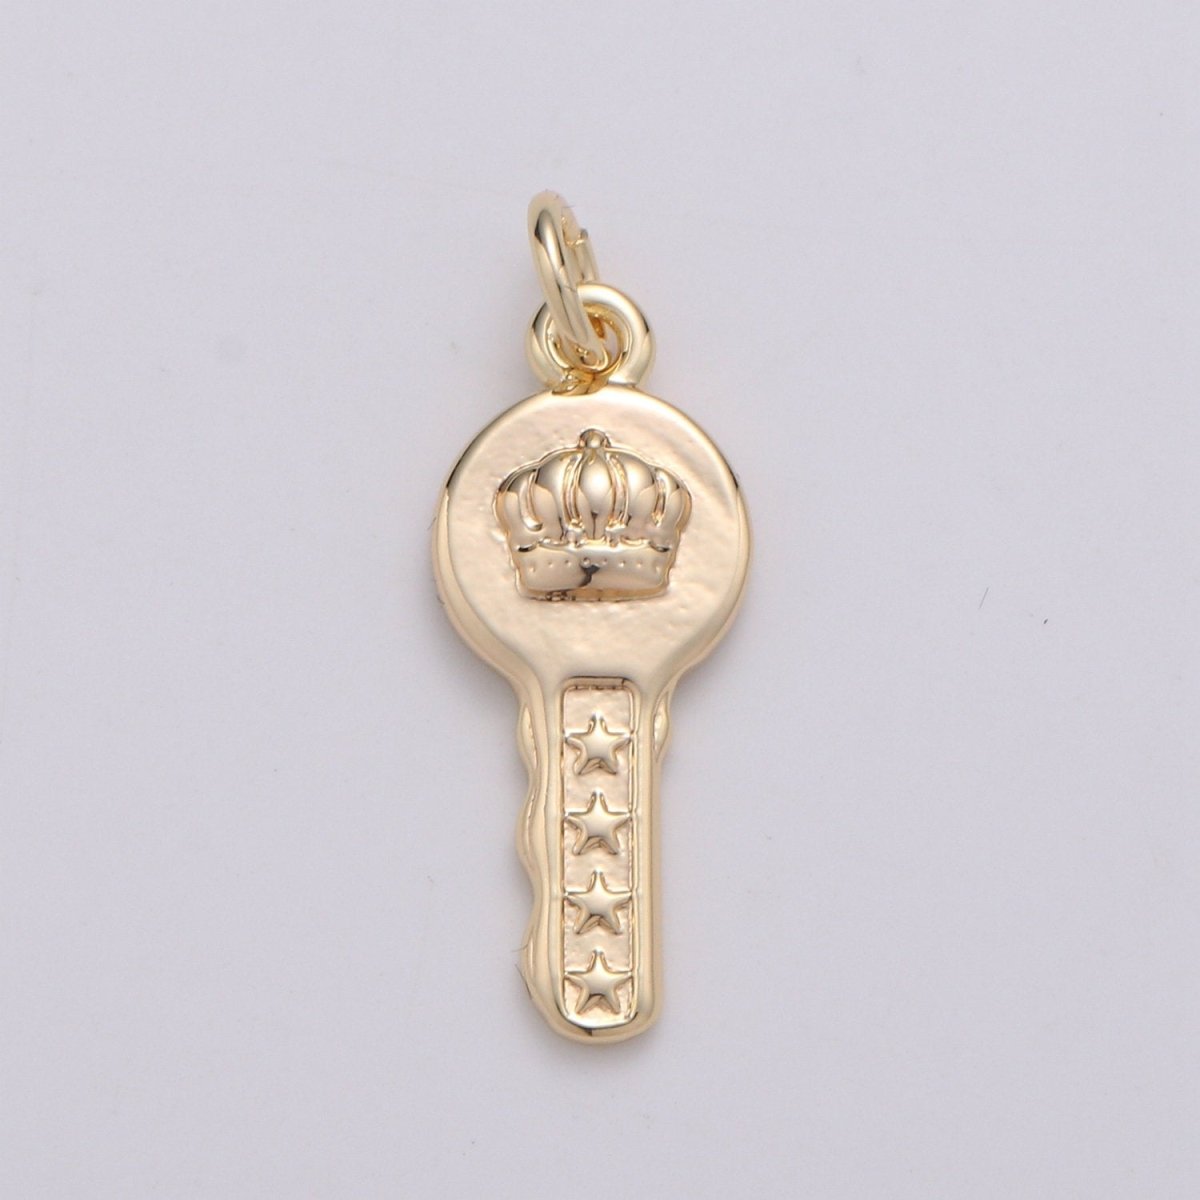 18k Gold Filled Key Pendant Charm, Dainty Crown Key Pendant Charm, Gold Filled Key of Heaven Pendant, For DIY Jewelry Making Supply D-742 - DLUXCA